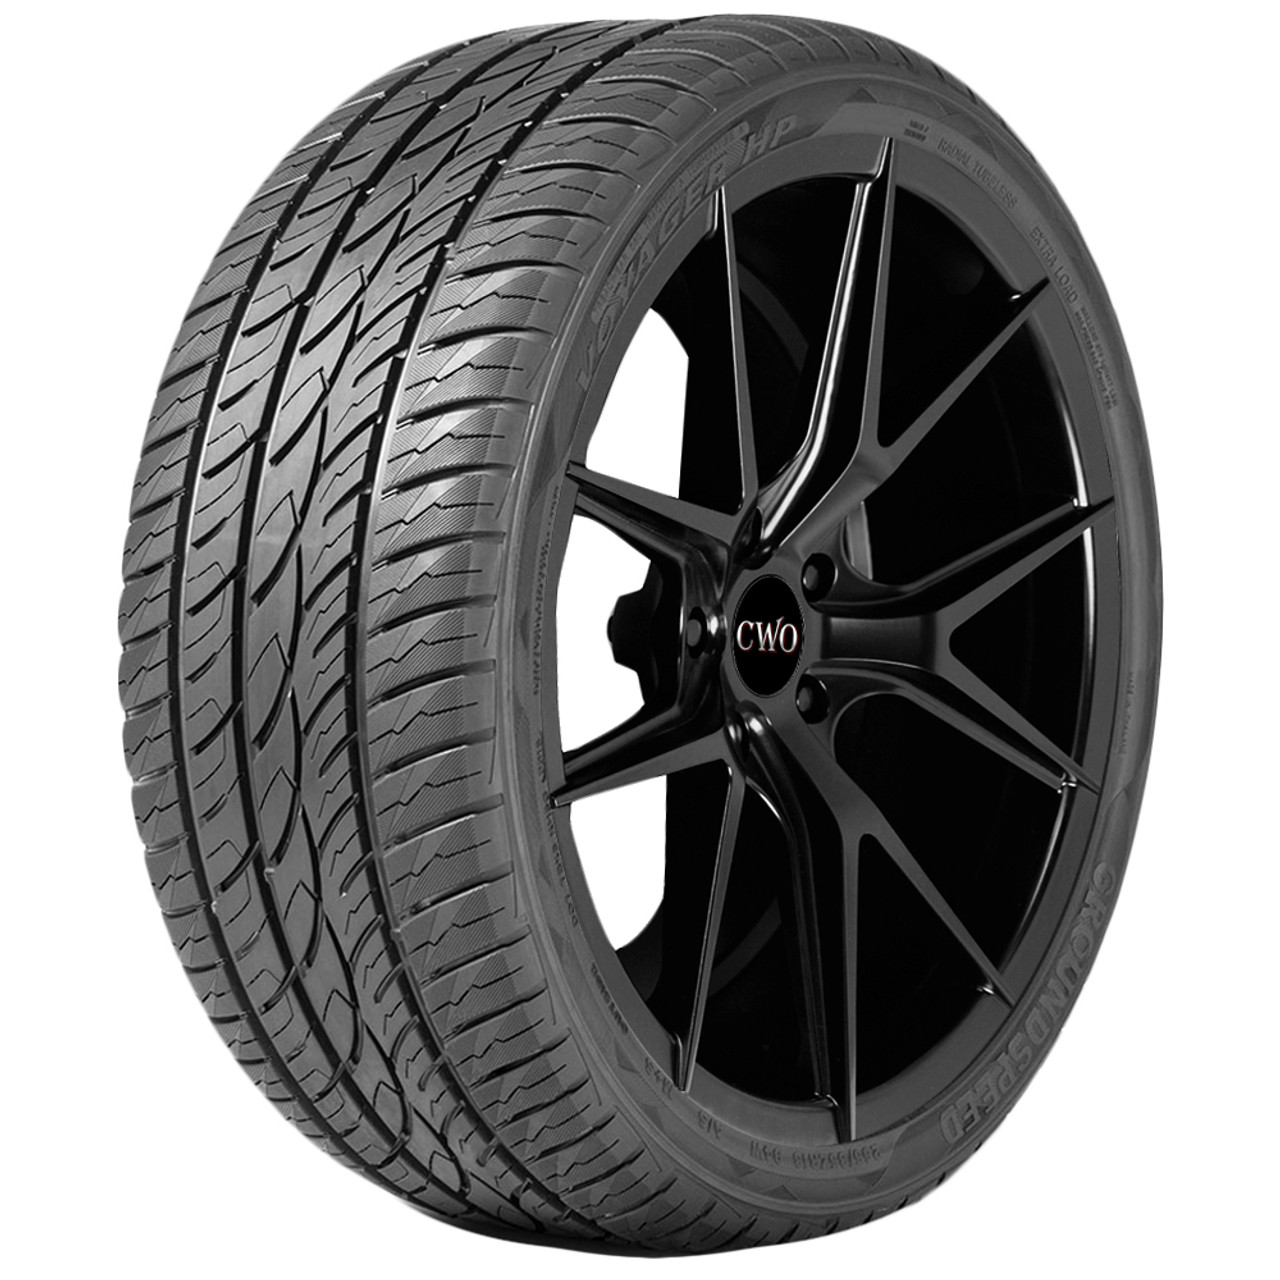 235/45ZR17 GroundSpeed Voyager HP 97W XL Black Wall Tire 115920 ...